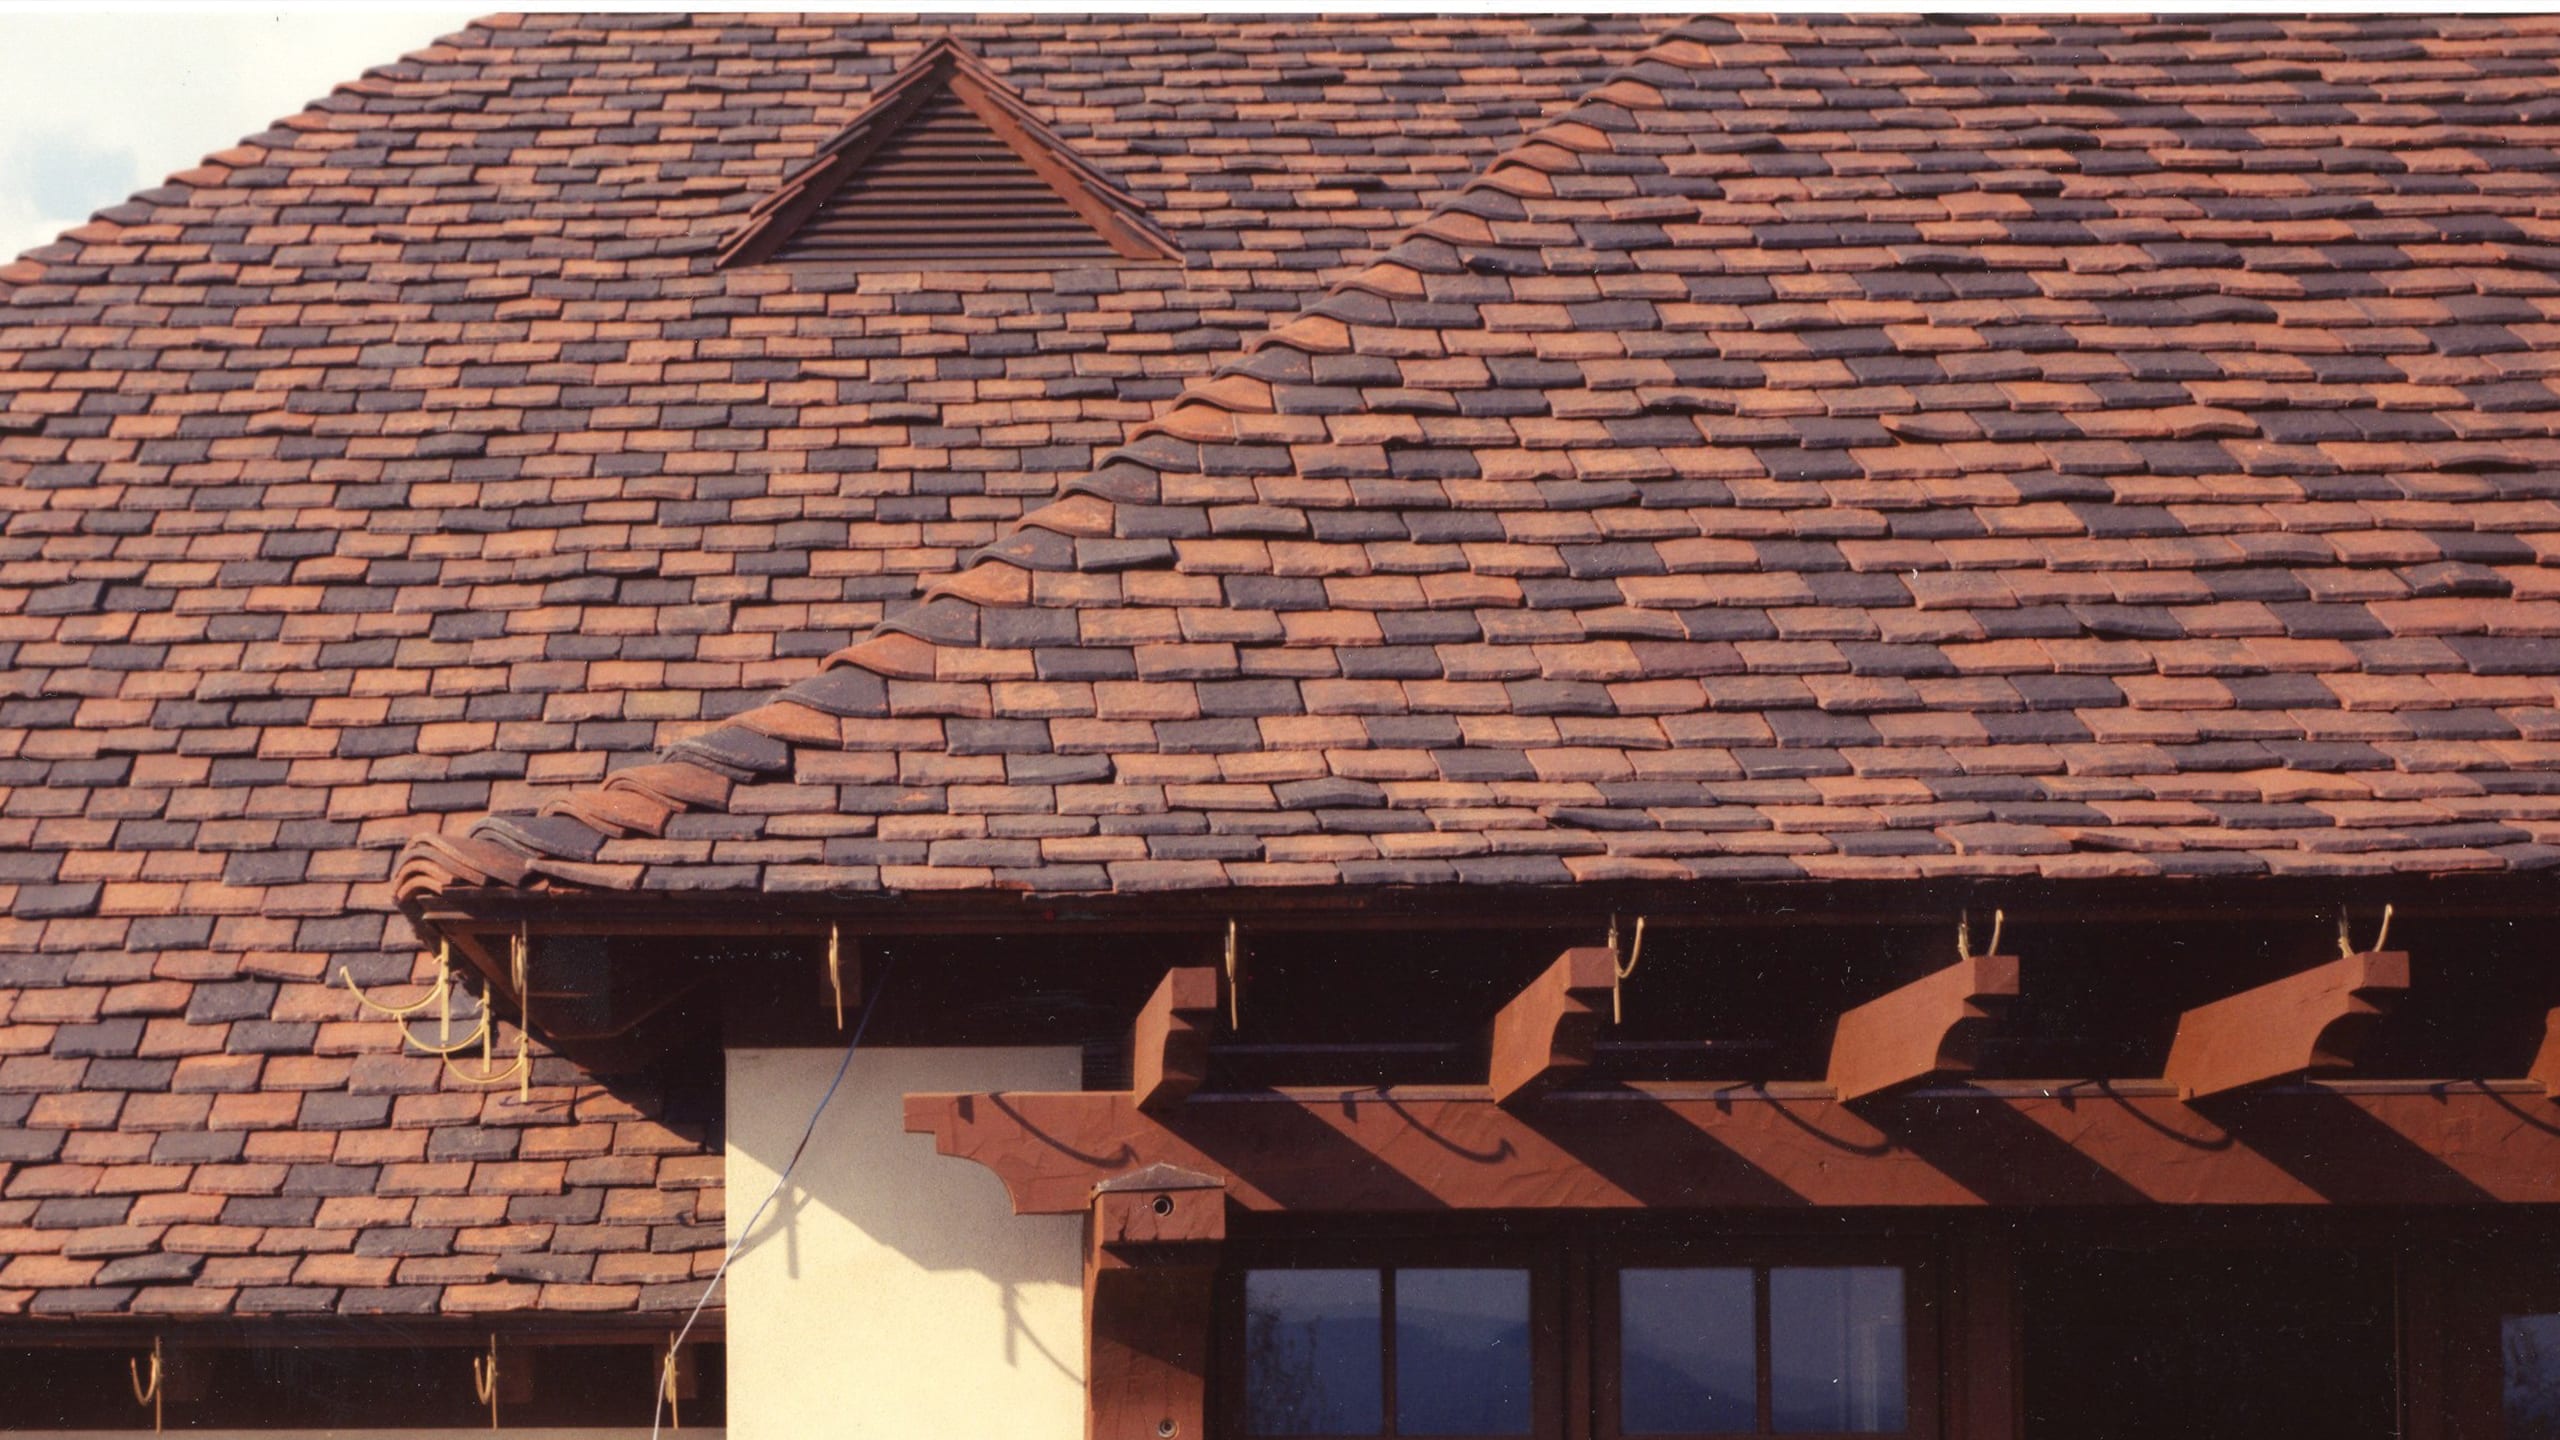 Private Residence - Roaring Gap Ludowici Roof Tile